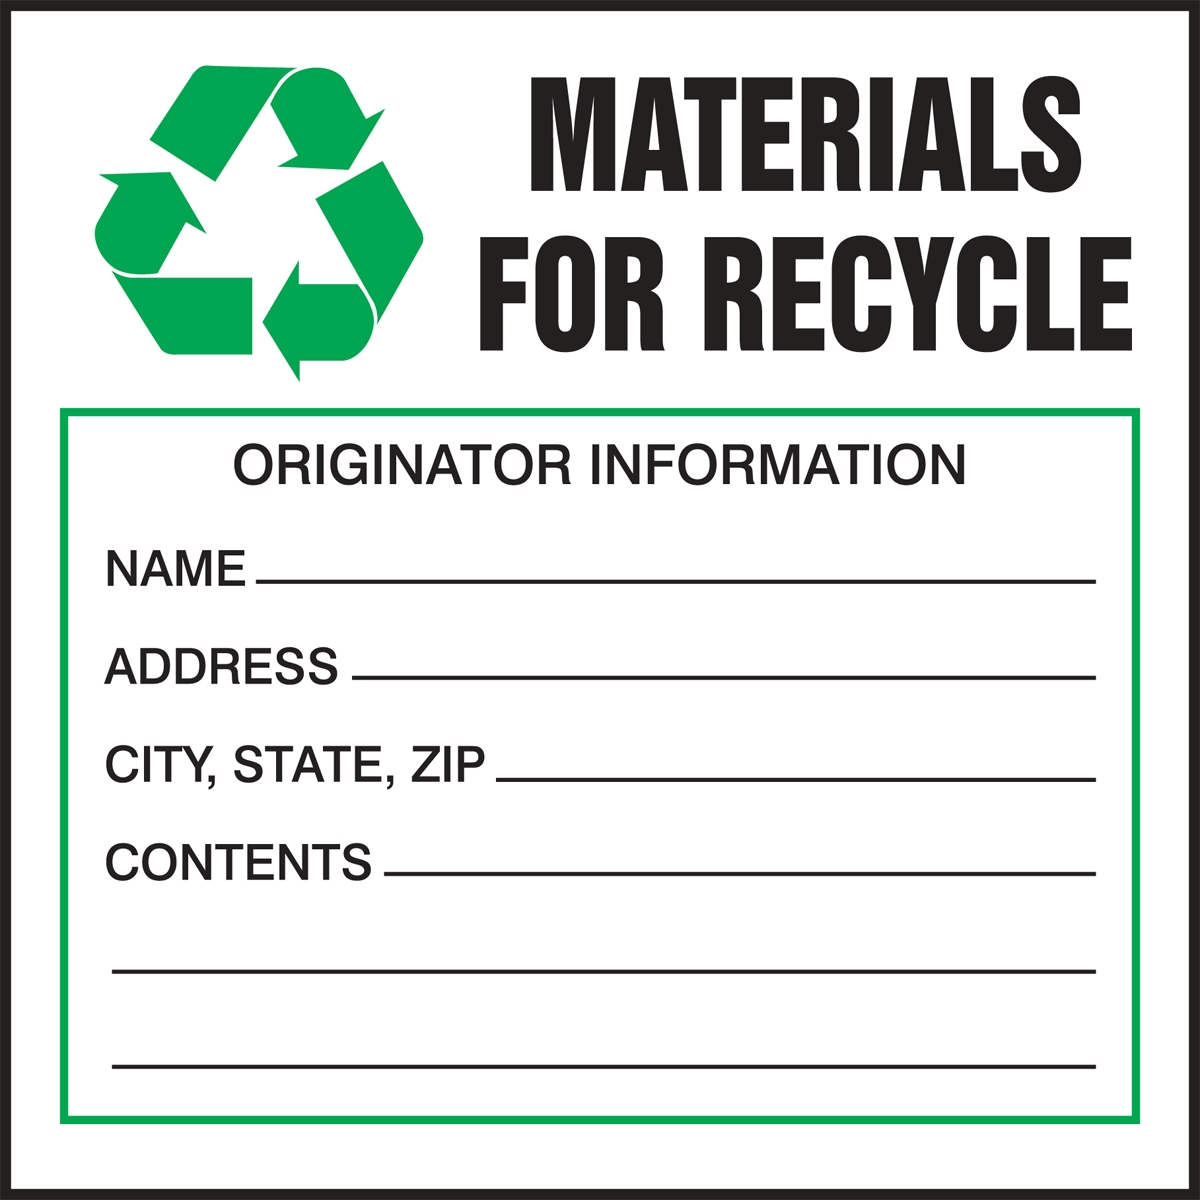 MATERIALS FOR RECYCLE